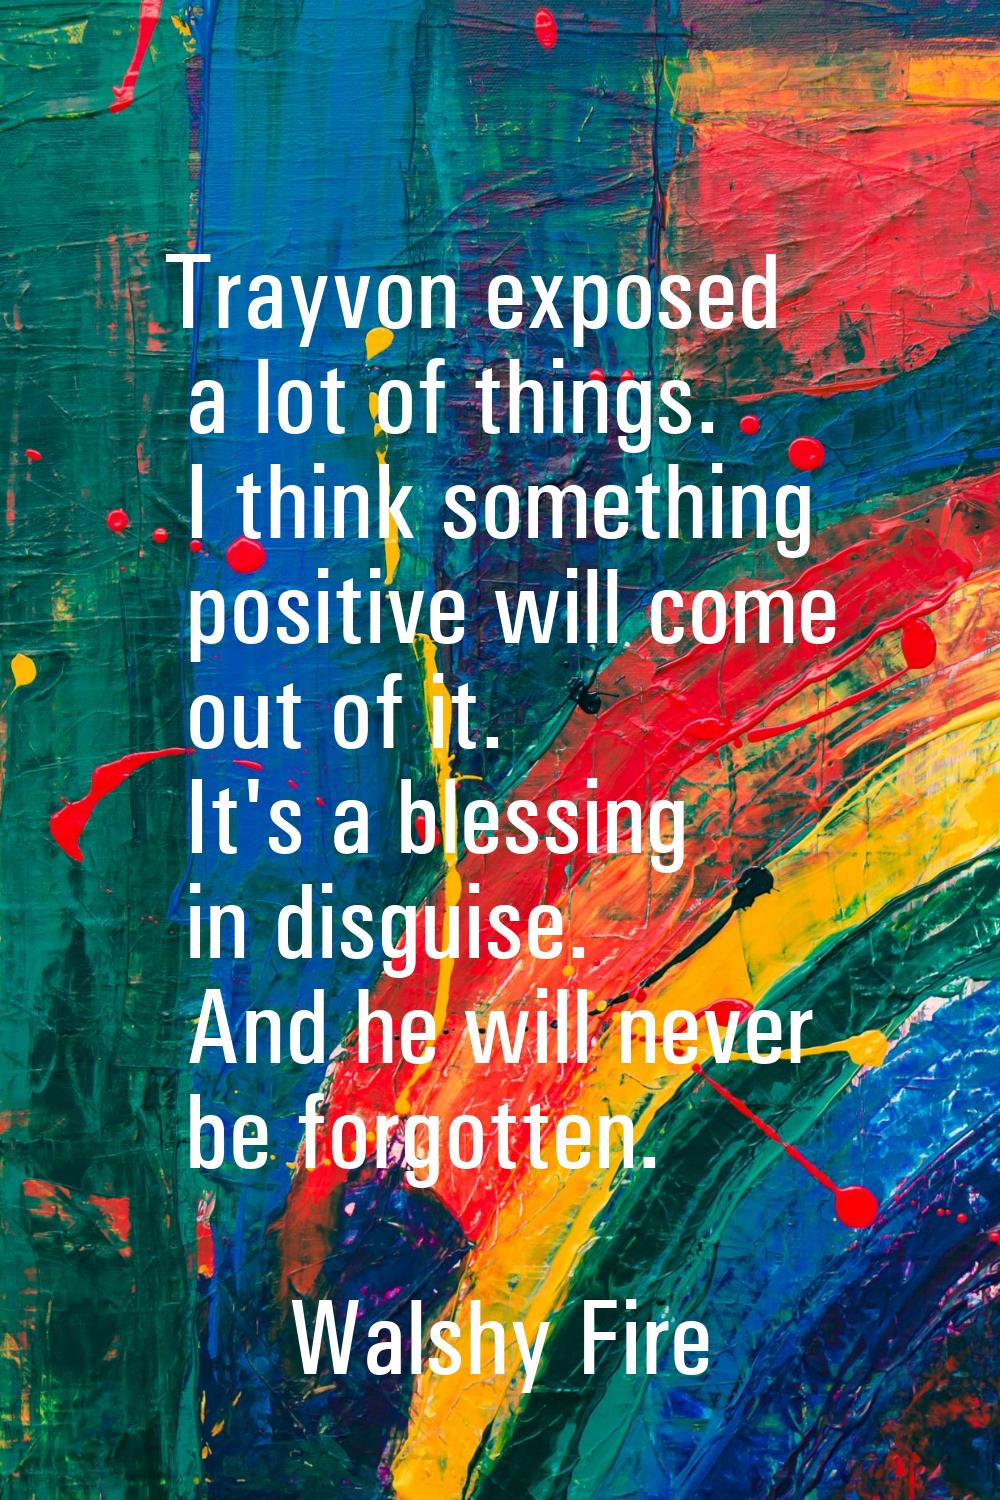 Trayvon exposed a lot of things. I think something positive will come out of it. It's a blessing in